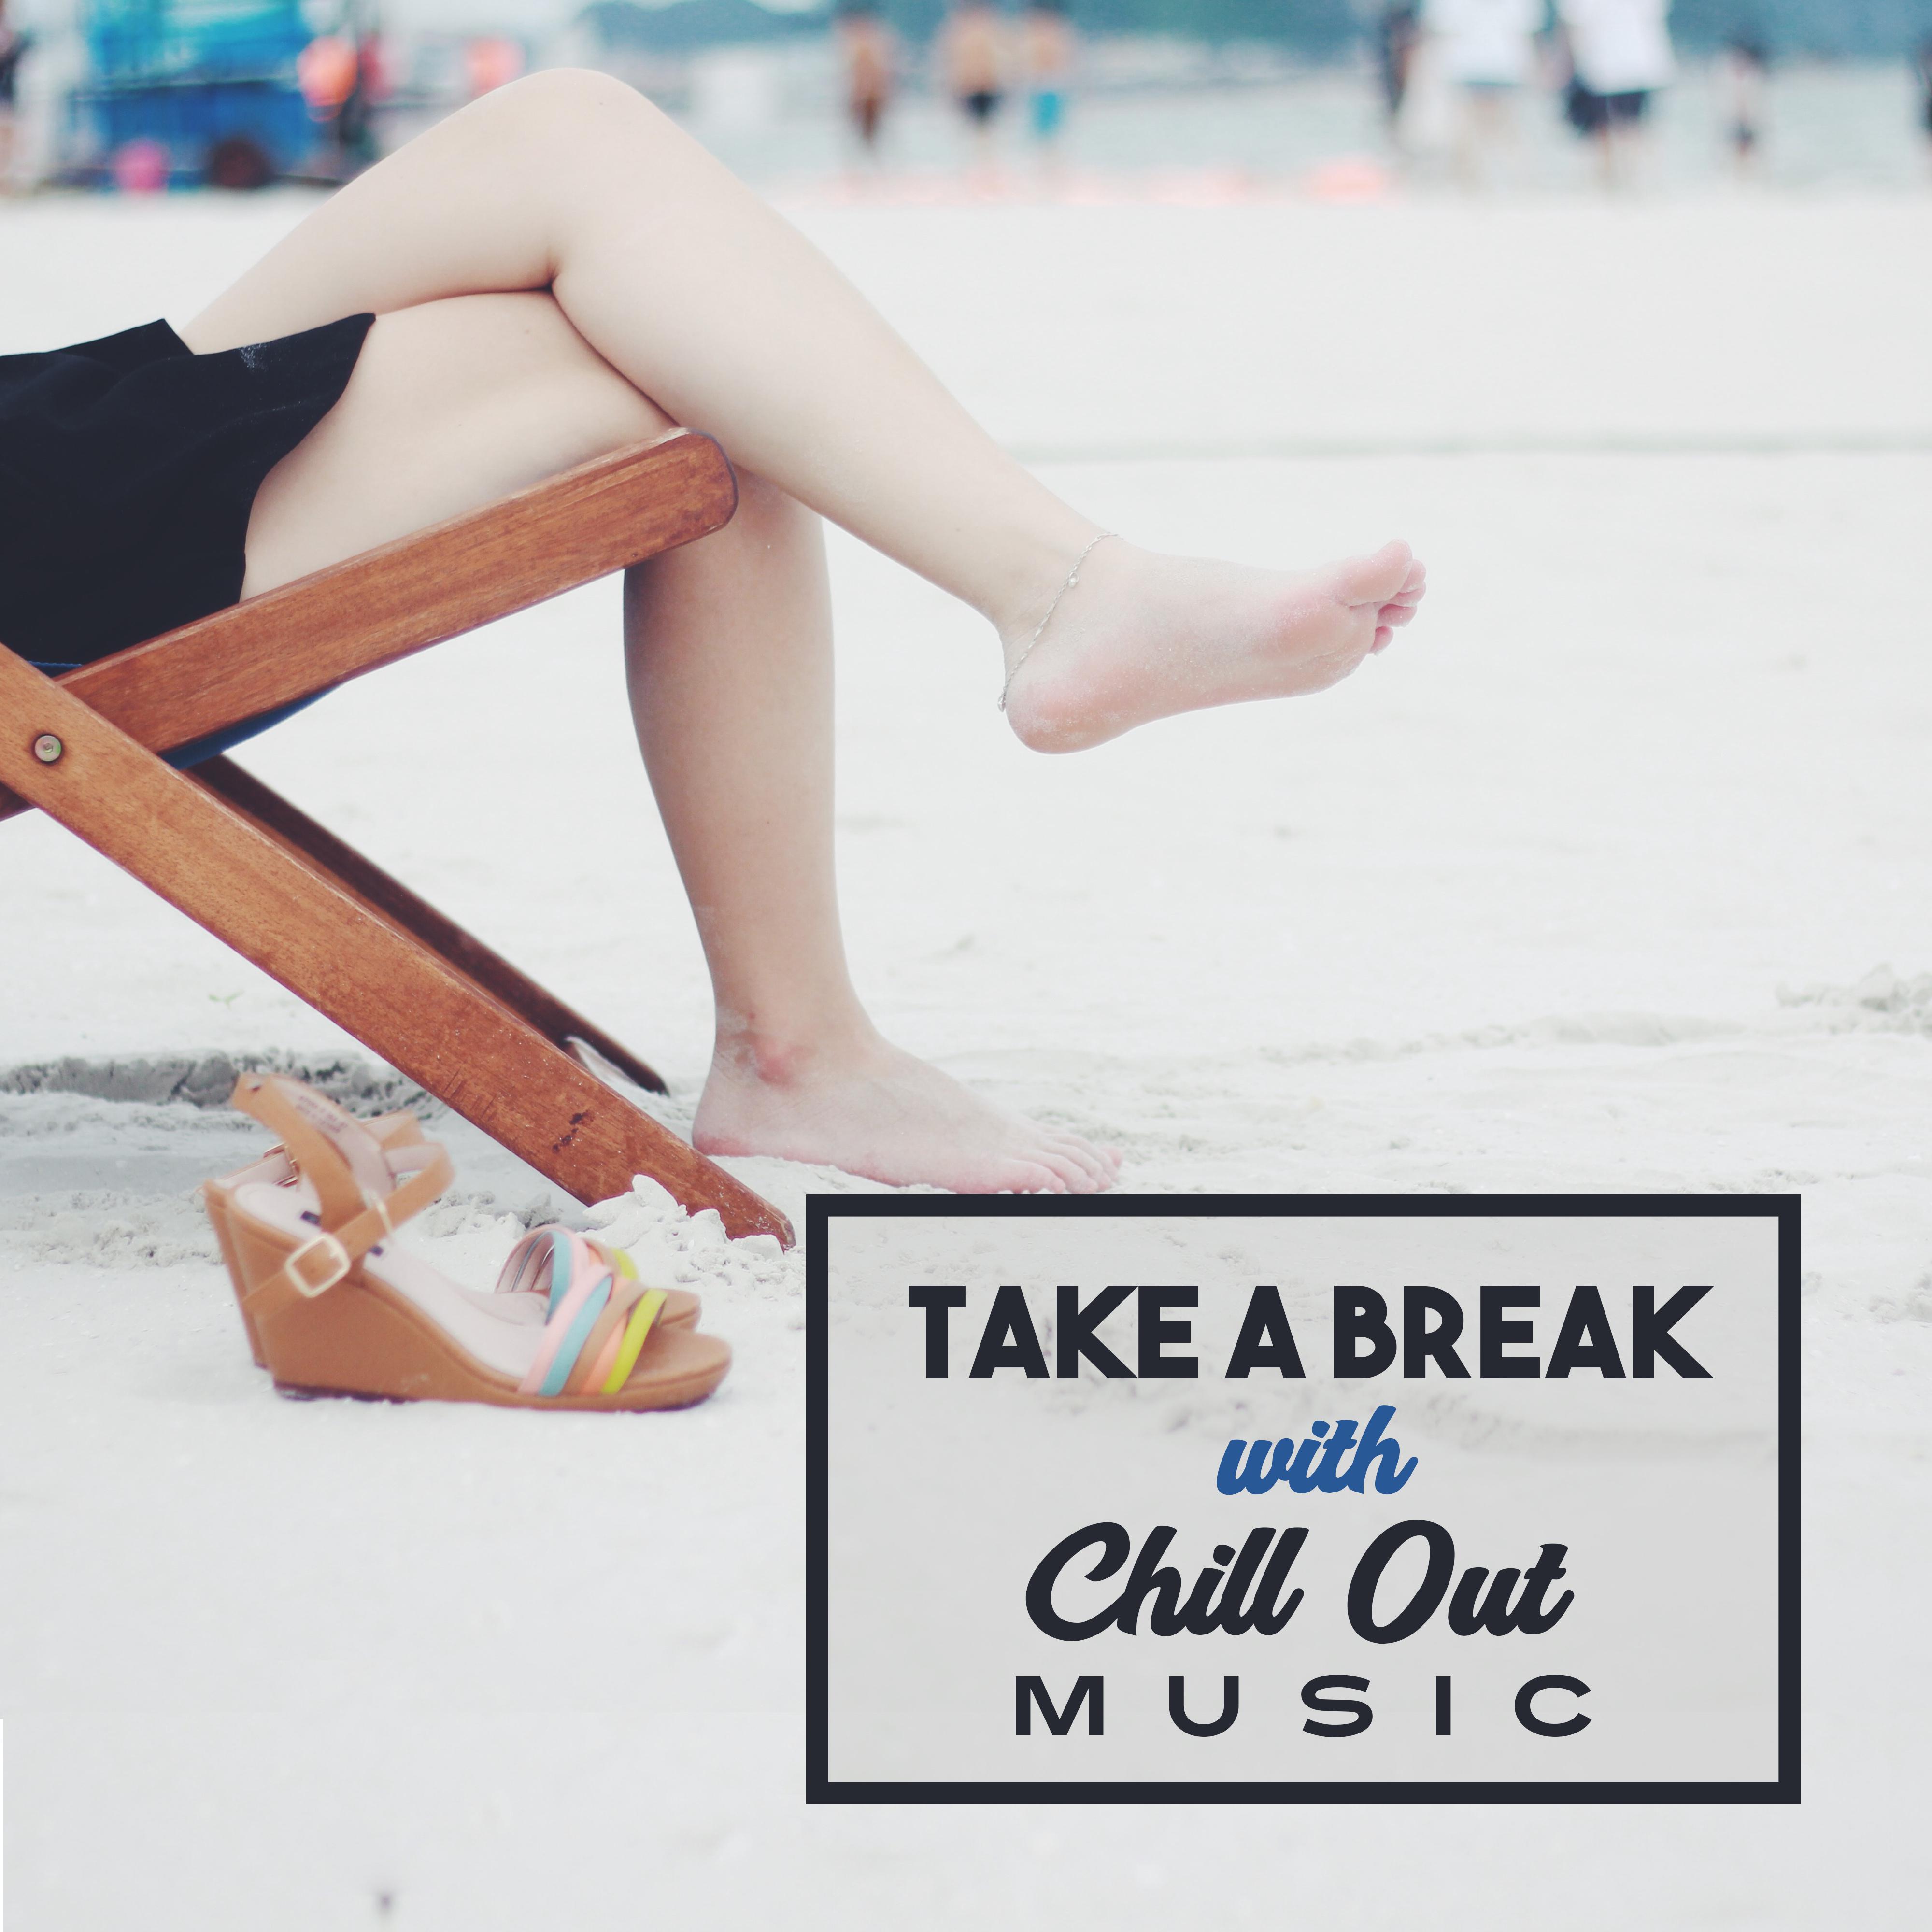 Take a Break with Chill Out Music – Relax with Chill Out, Beautiful Moments, Rest on the Beach, Soft Sounds